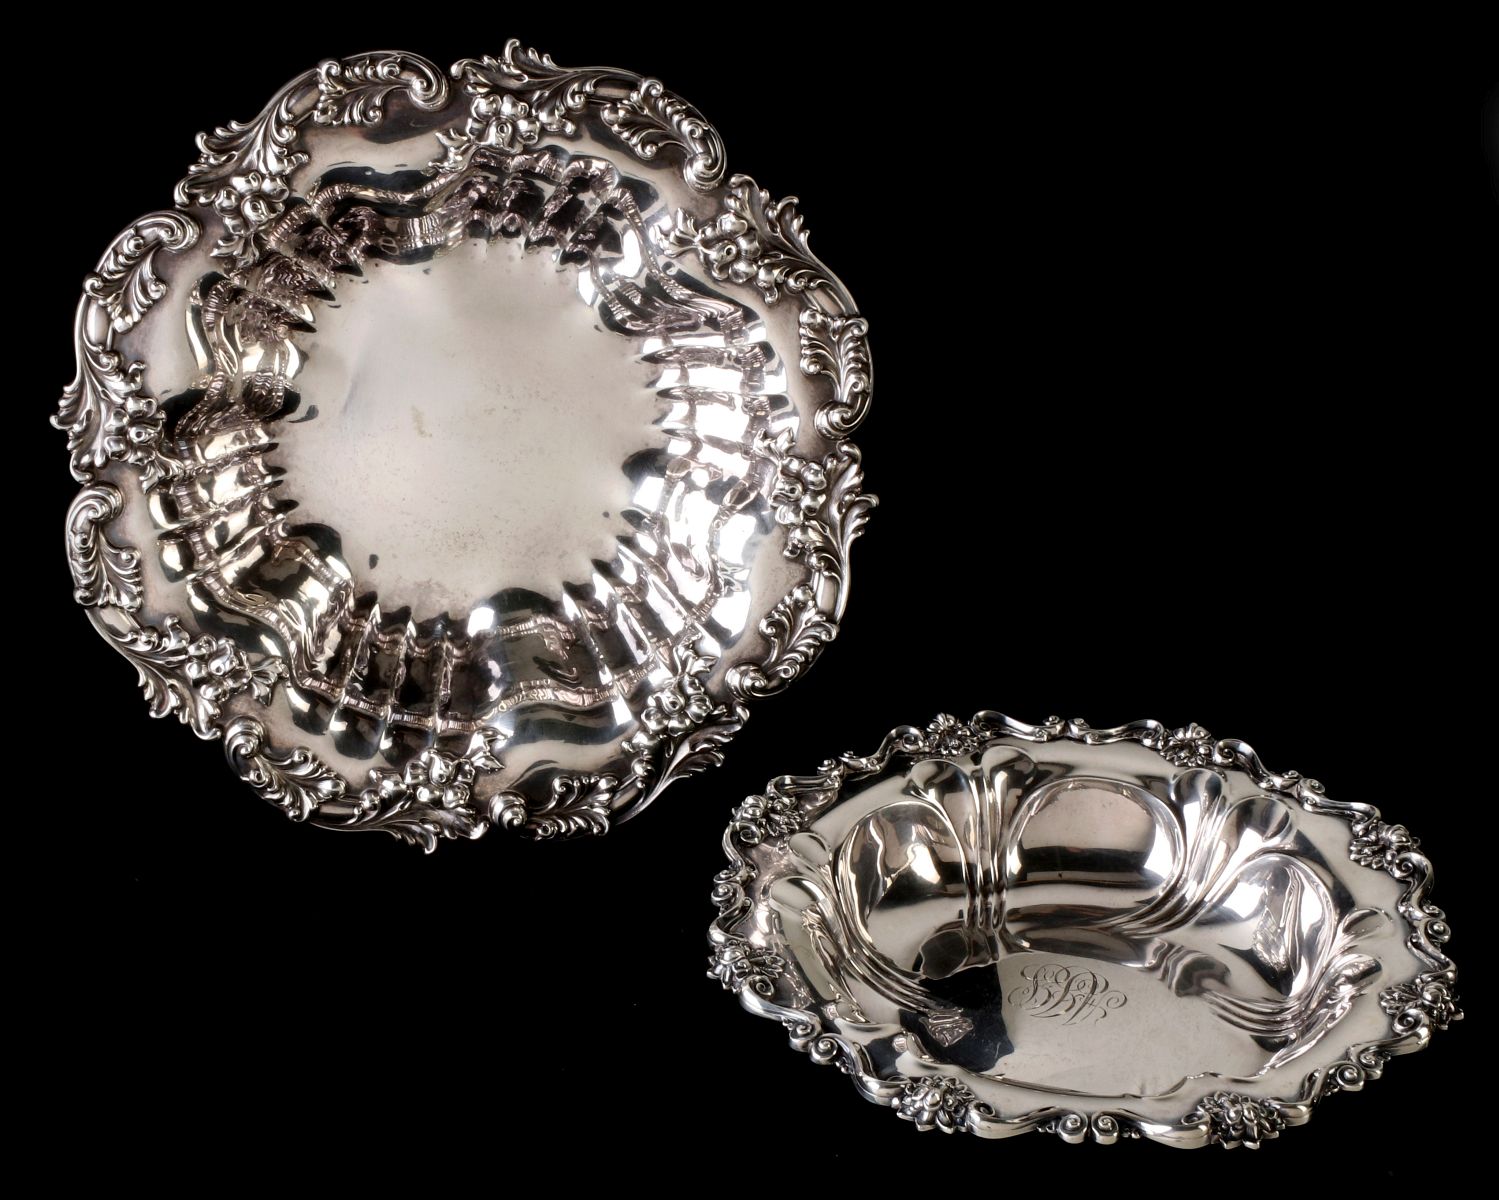 TWO EARLY 20TH CENTURY STERLING SILVER BOWLS